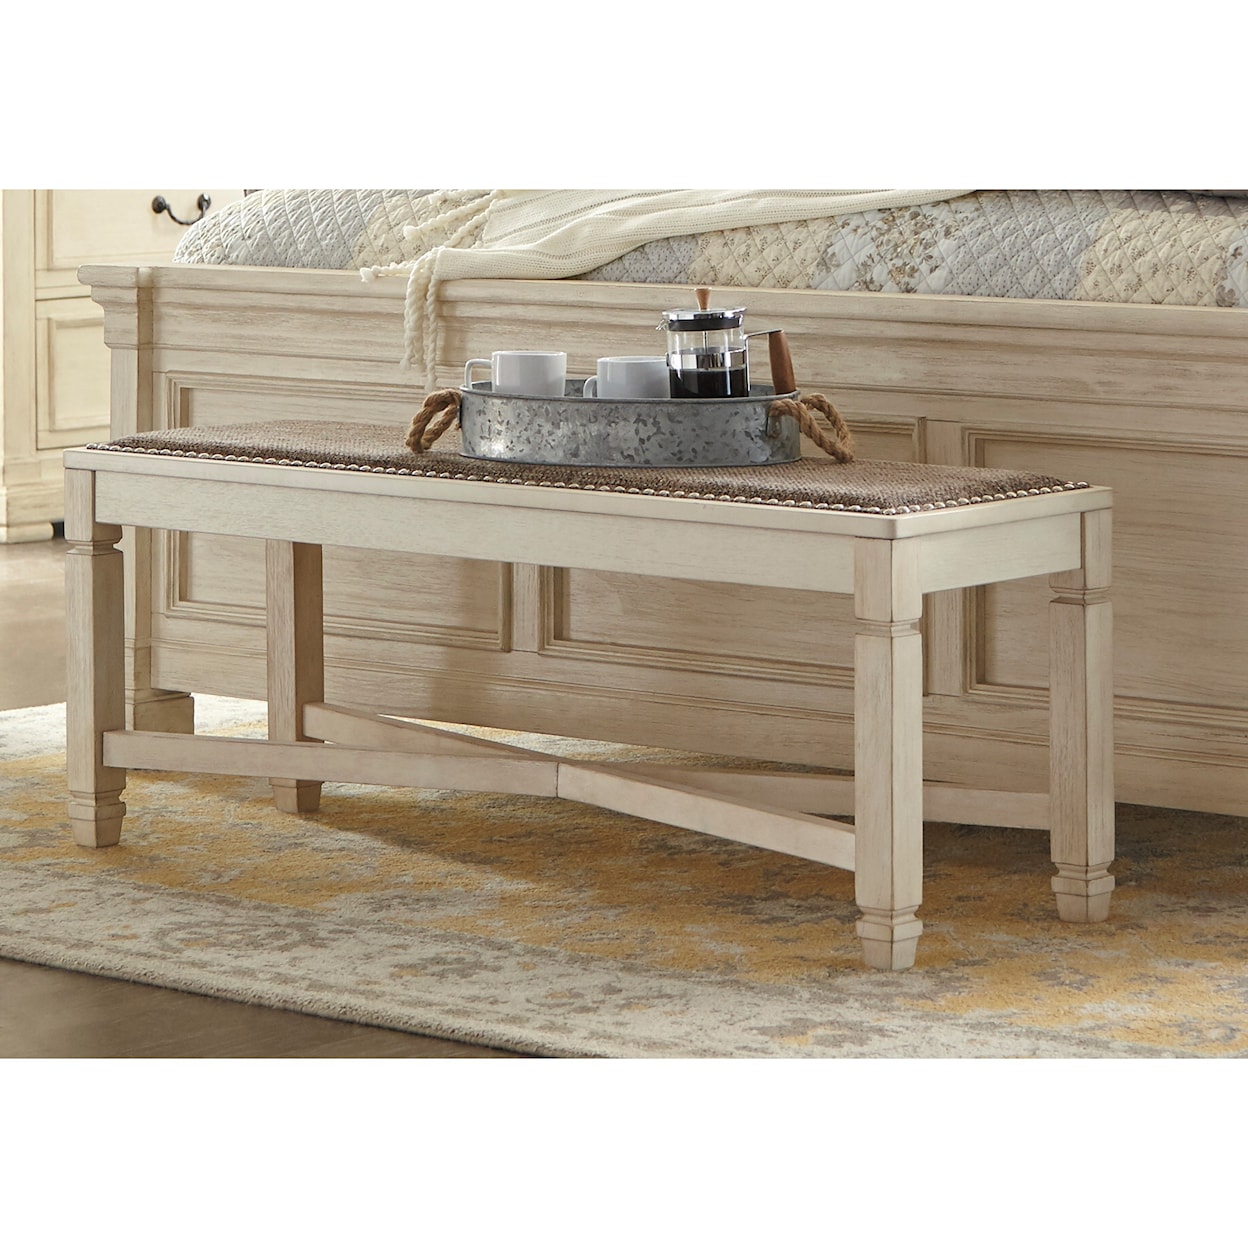 Michael Alan Select Bolanburg Upholstered Dining Room Bench